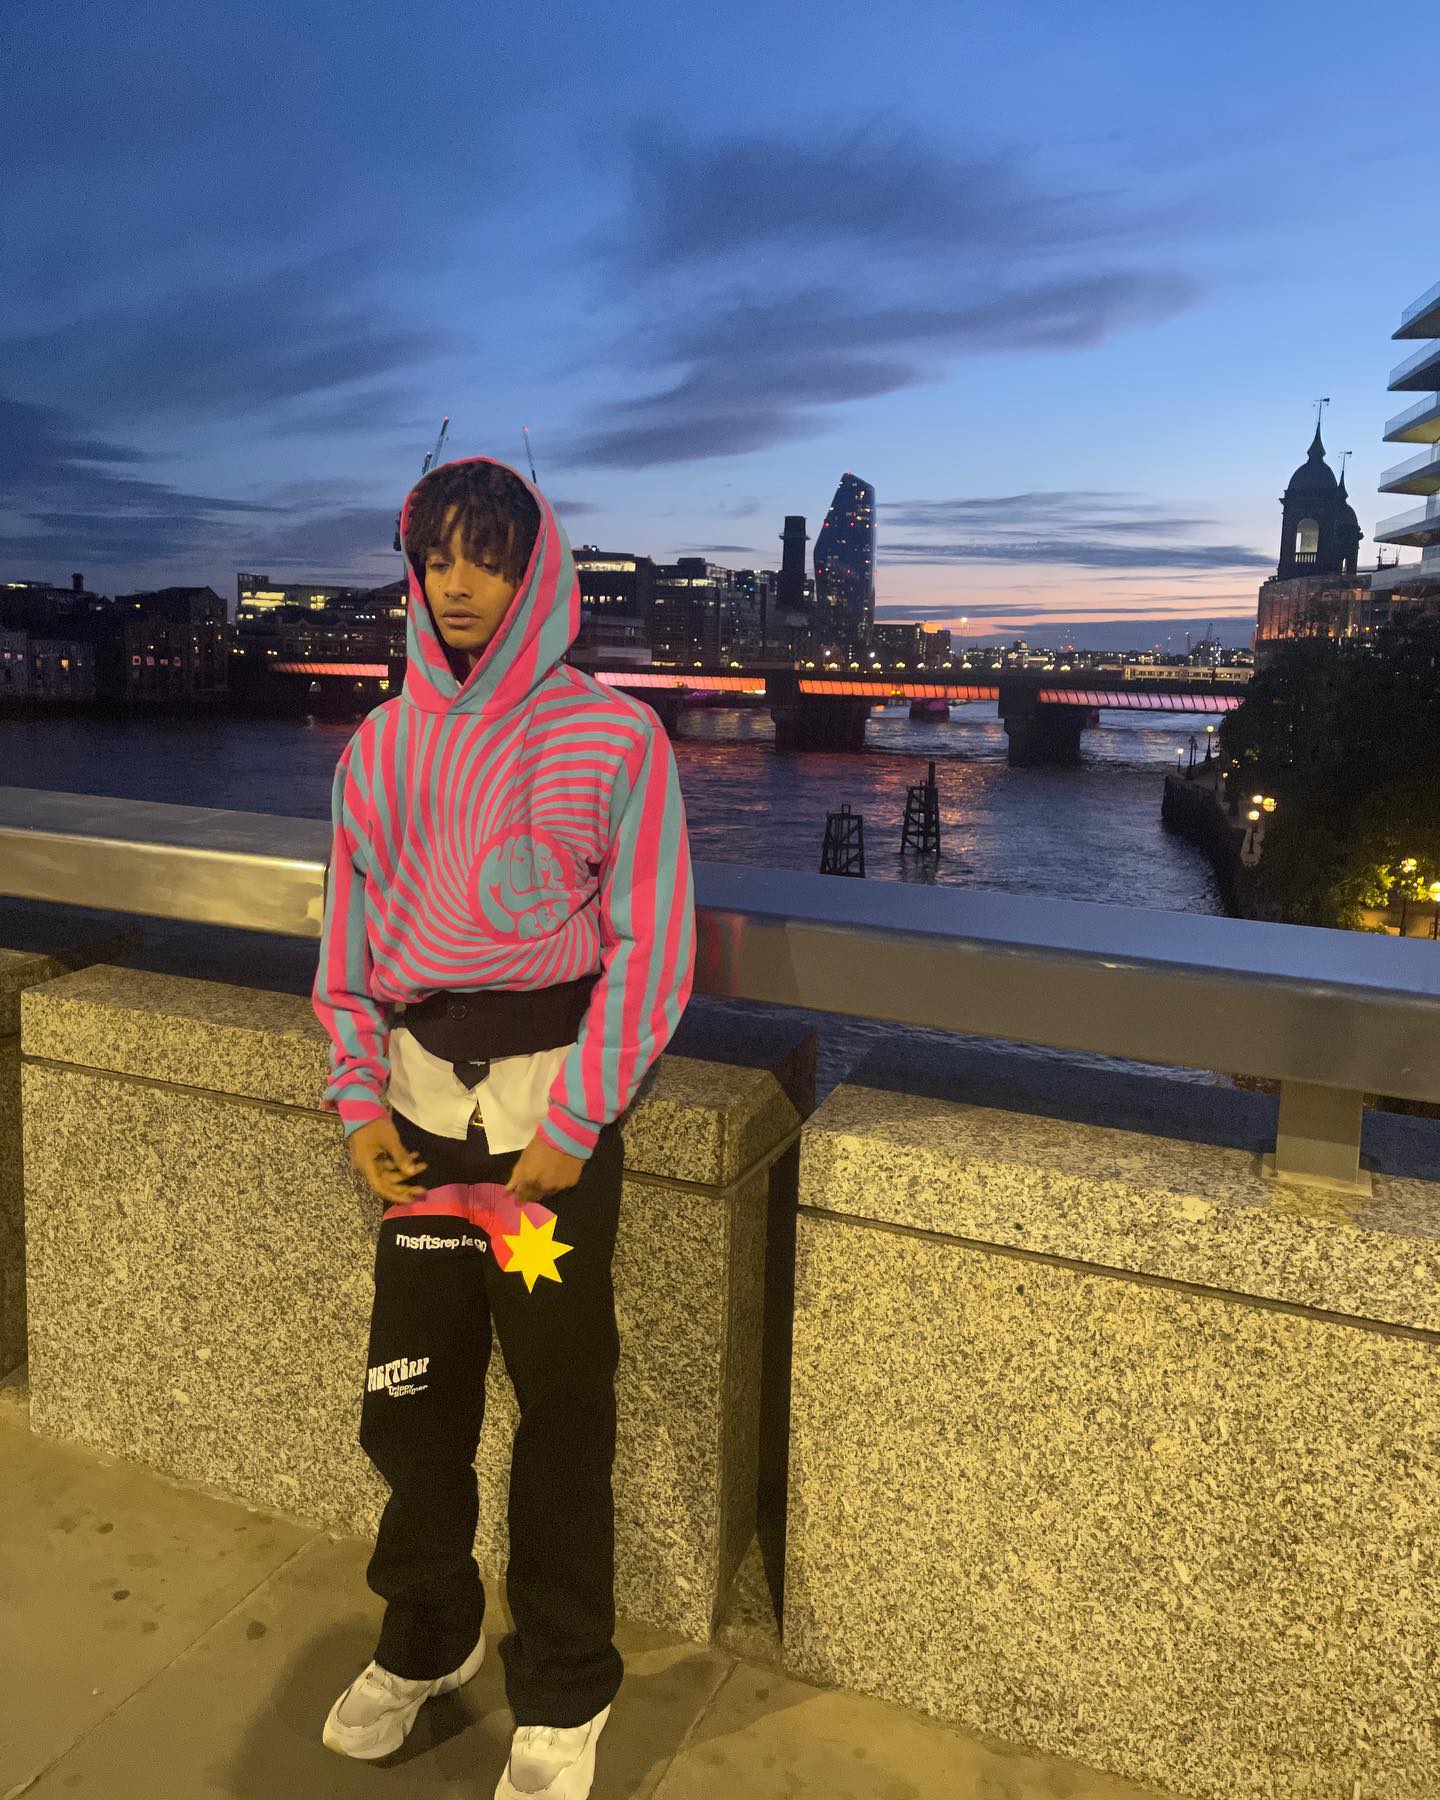 Jaden Smith launches MSFTSrep's fall 2022 collection in London